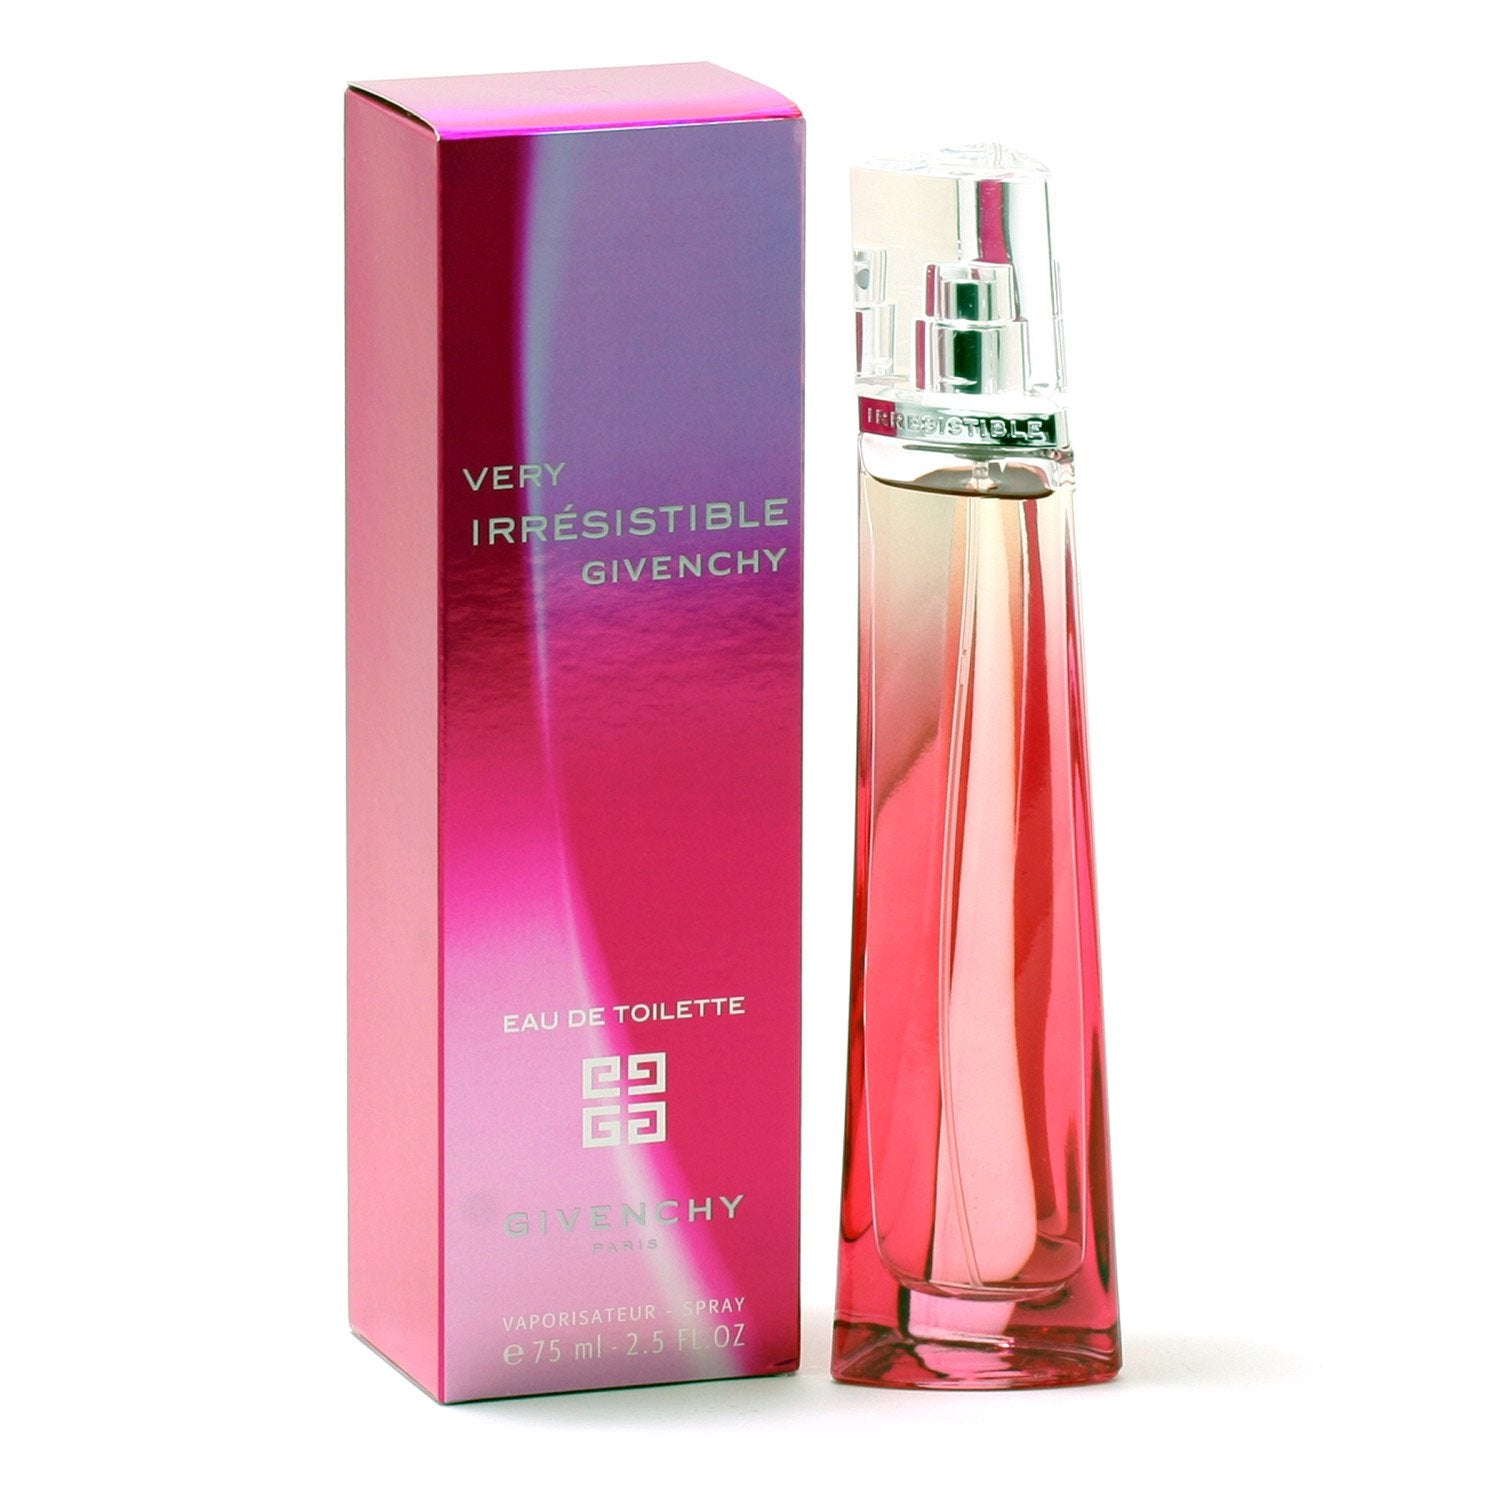 VERY IRRESISTIBLE FOR WOMEN BY GIVENCHY - EAU DE TOILETTE SPRAY, 2.5 OZ